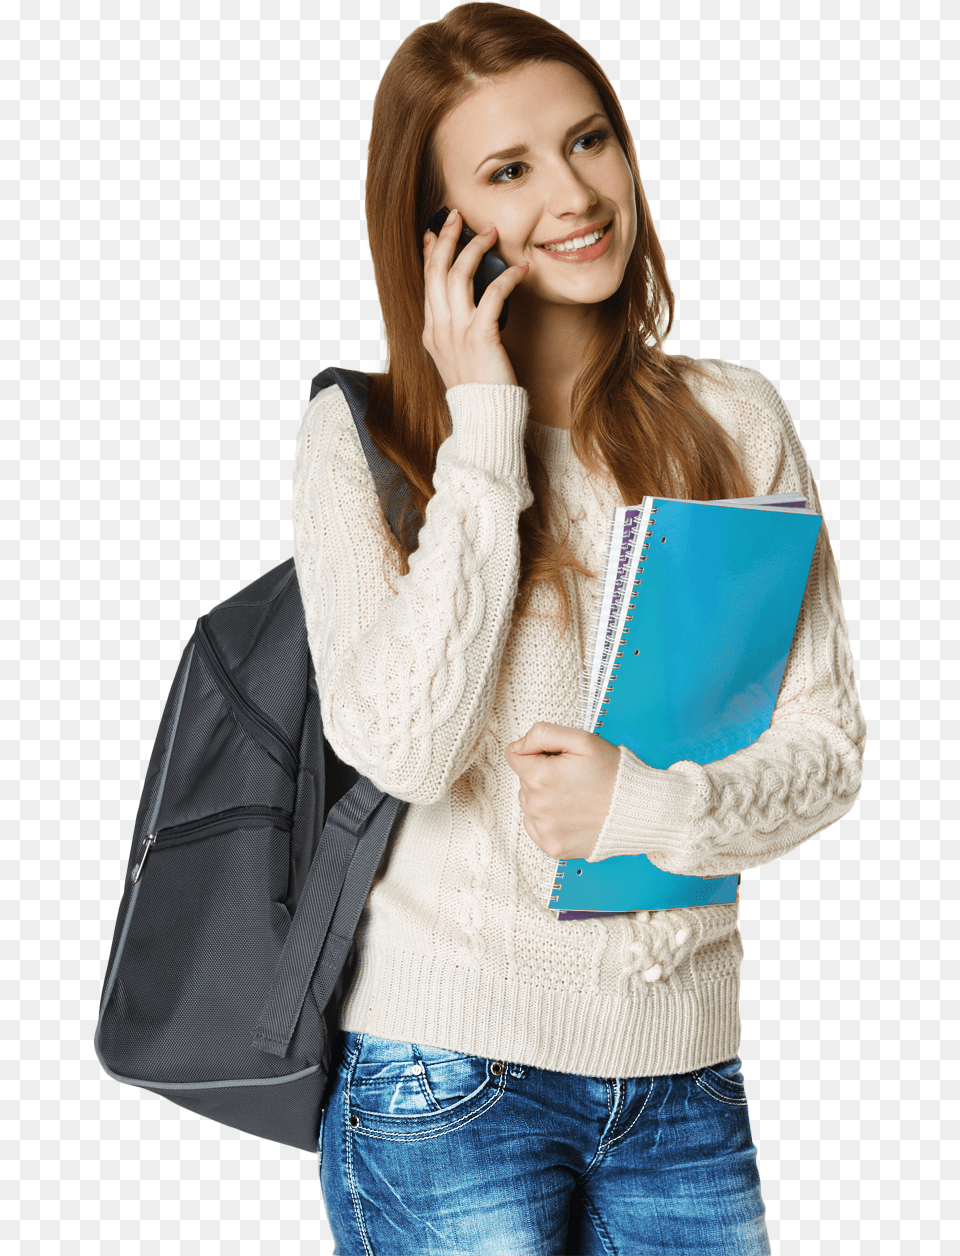 Student, Clothing, Pants, Jeans, Accessories Png